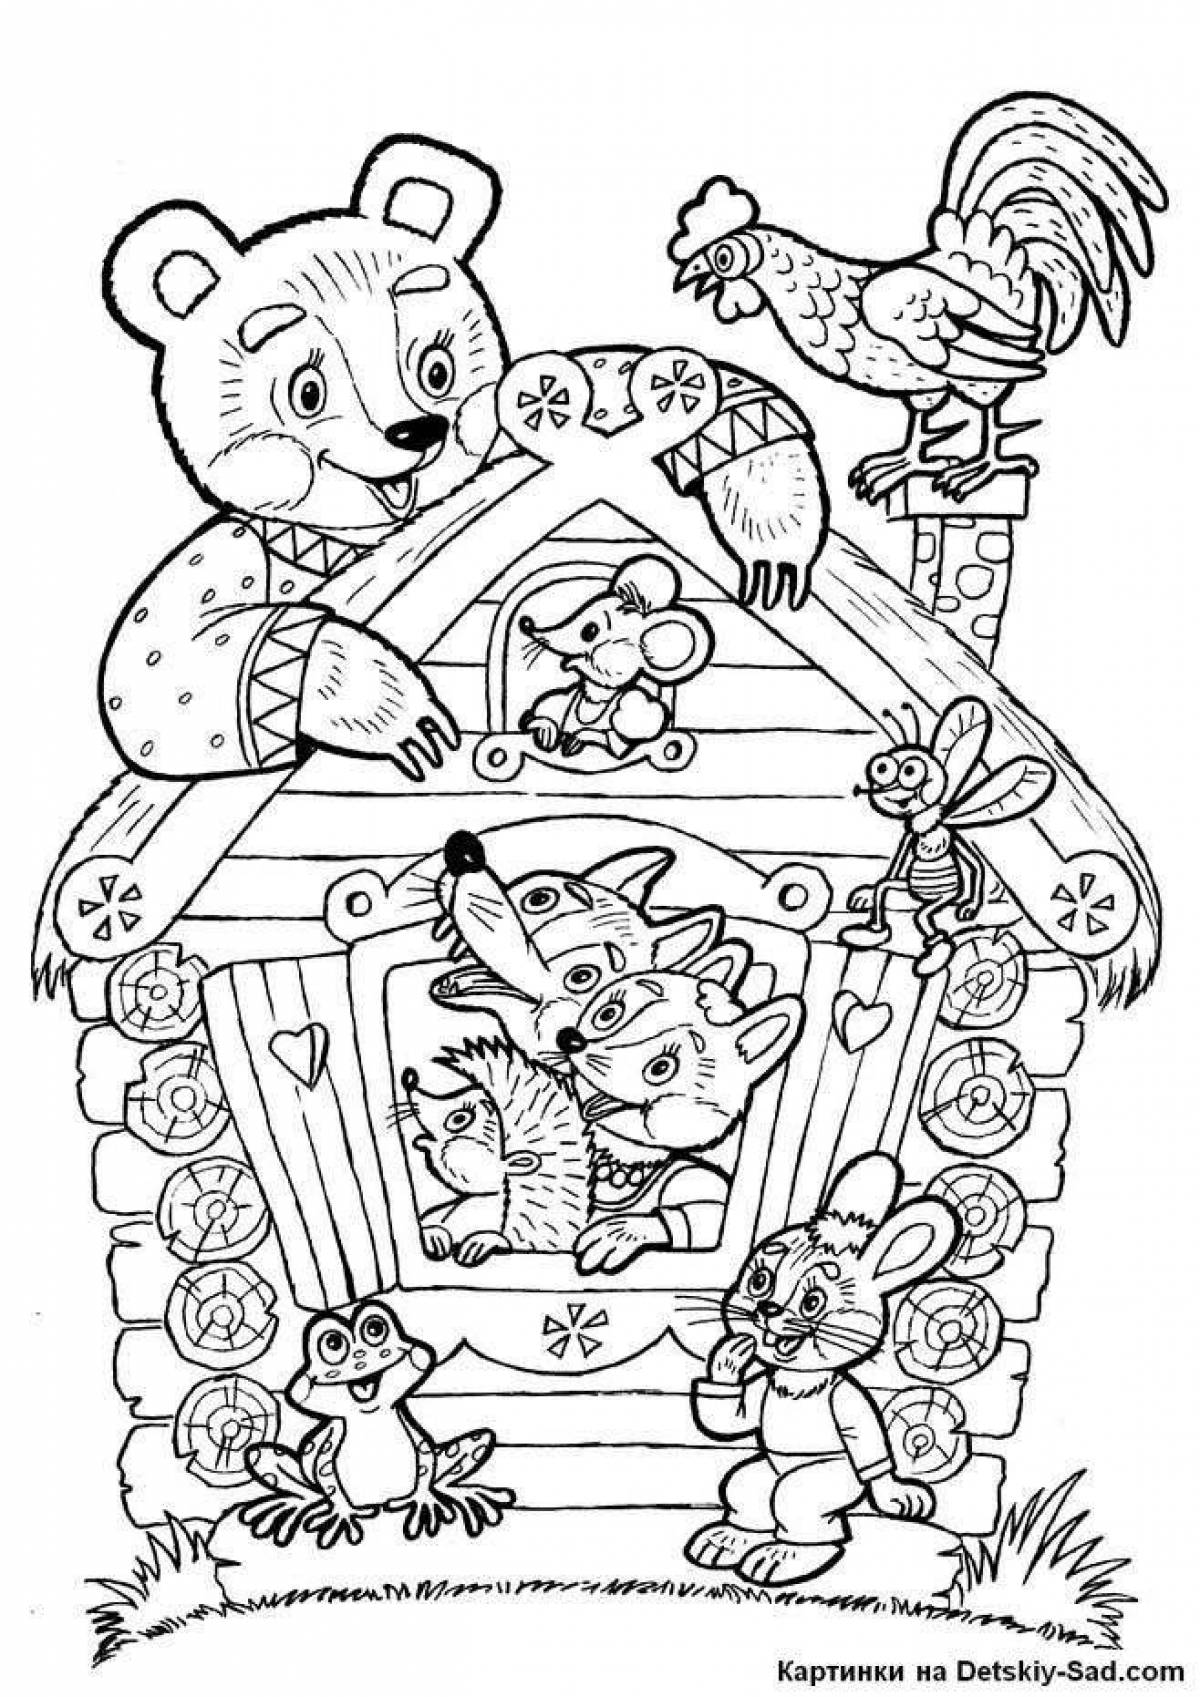 Fascinating fairy tale coloring pages